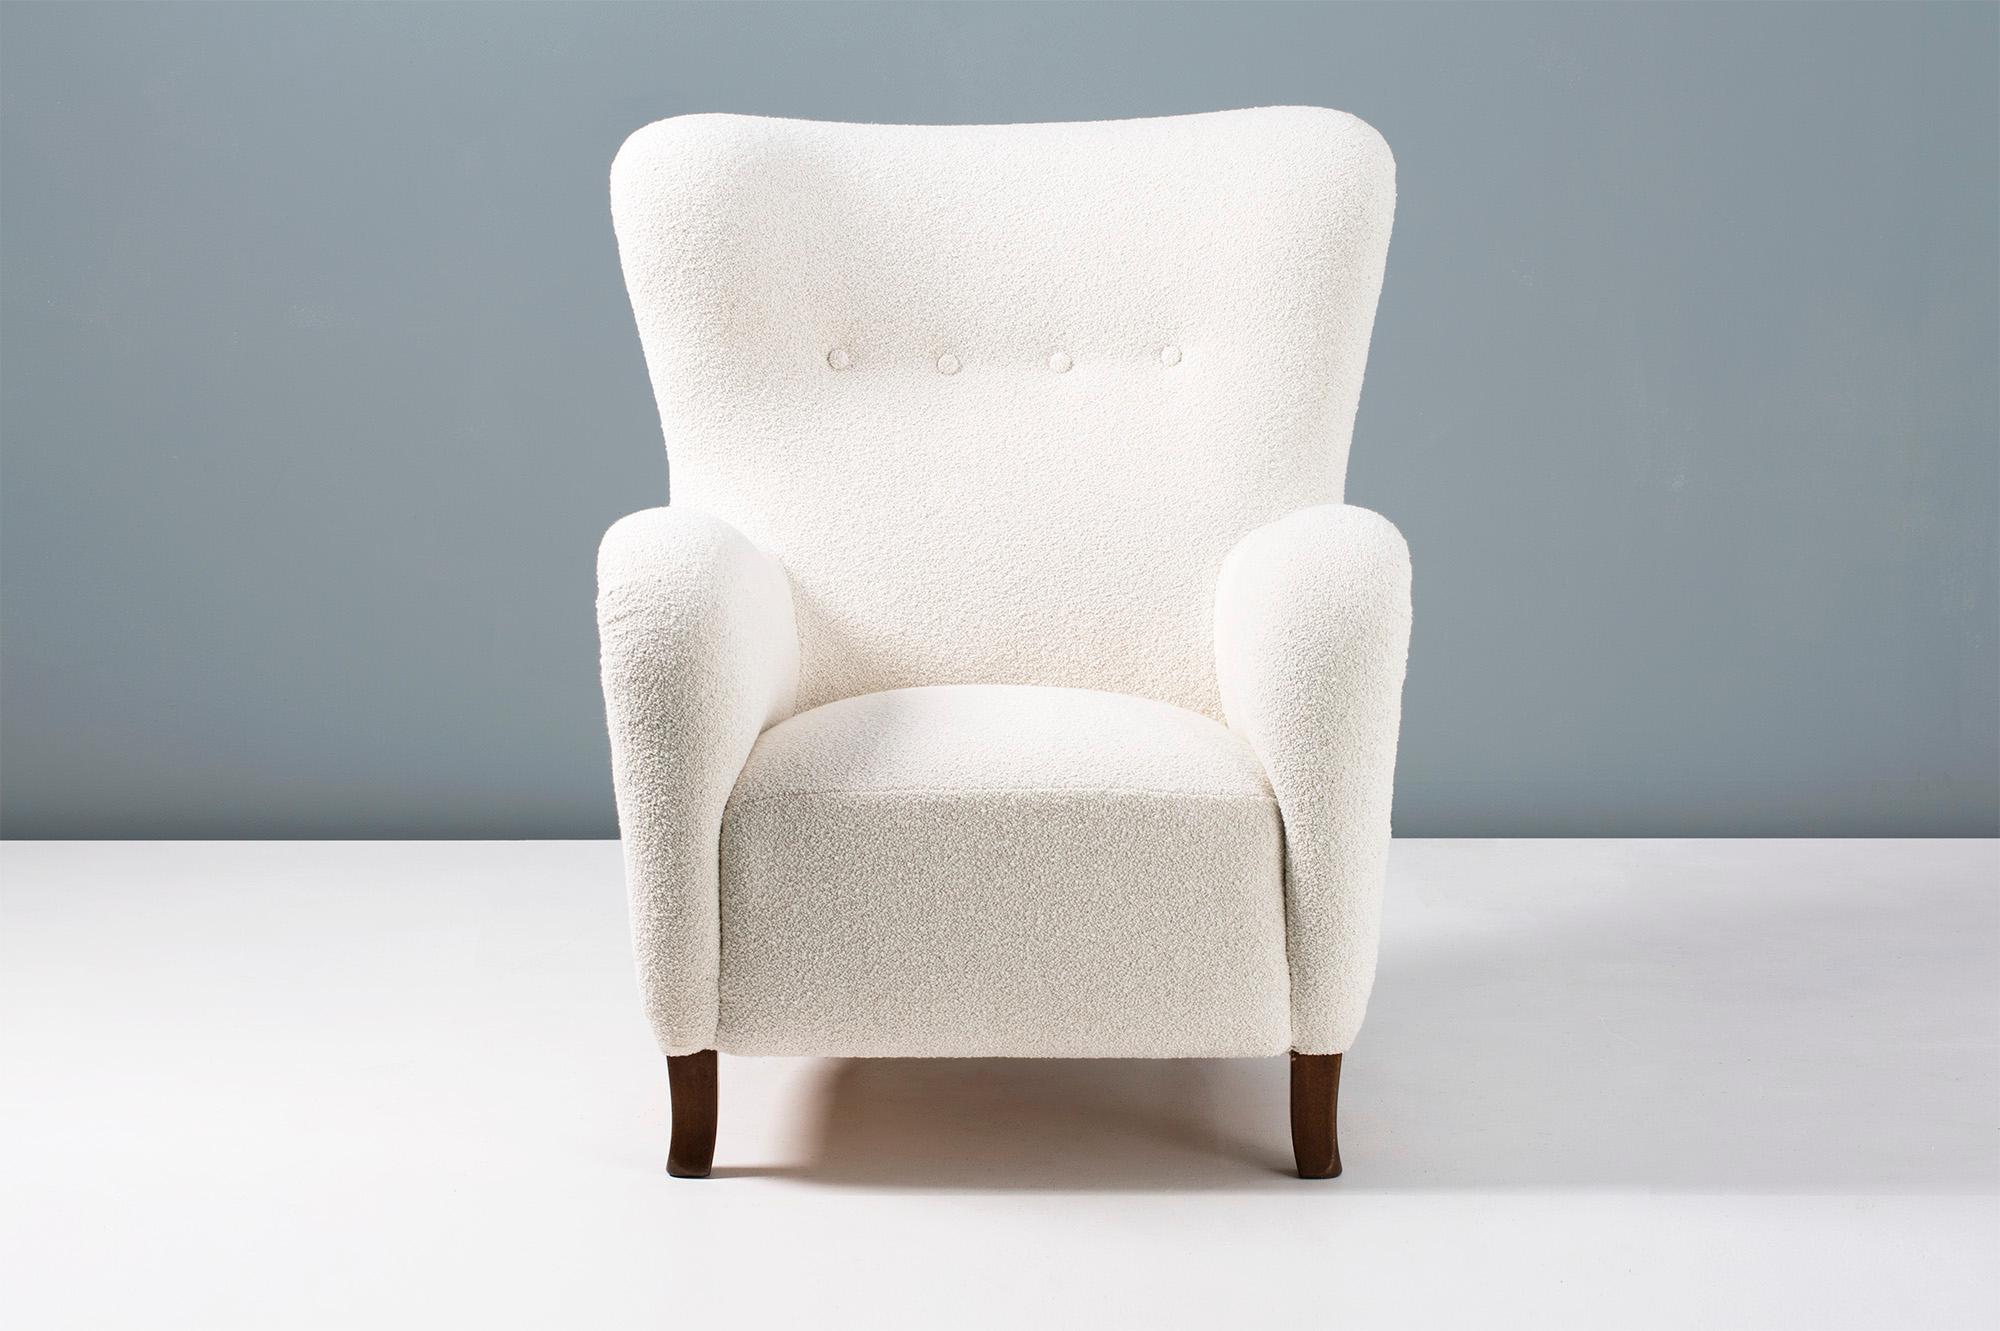 Dagmar design custom-made upholstered range

A custom made wing chair developed and produced at our workshops in London using the highest quality materials. The frames are hand-built from solid tulipwood with legs in a range of wood types and